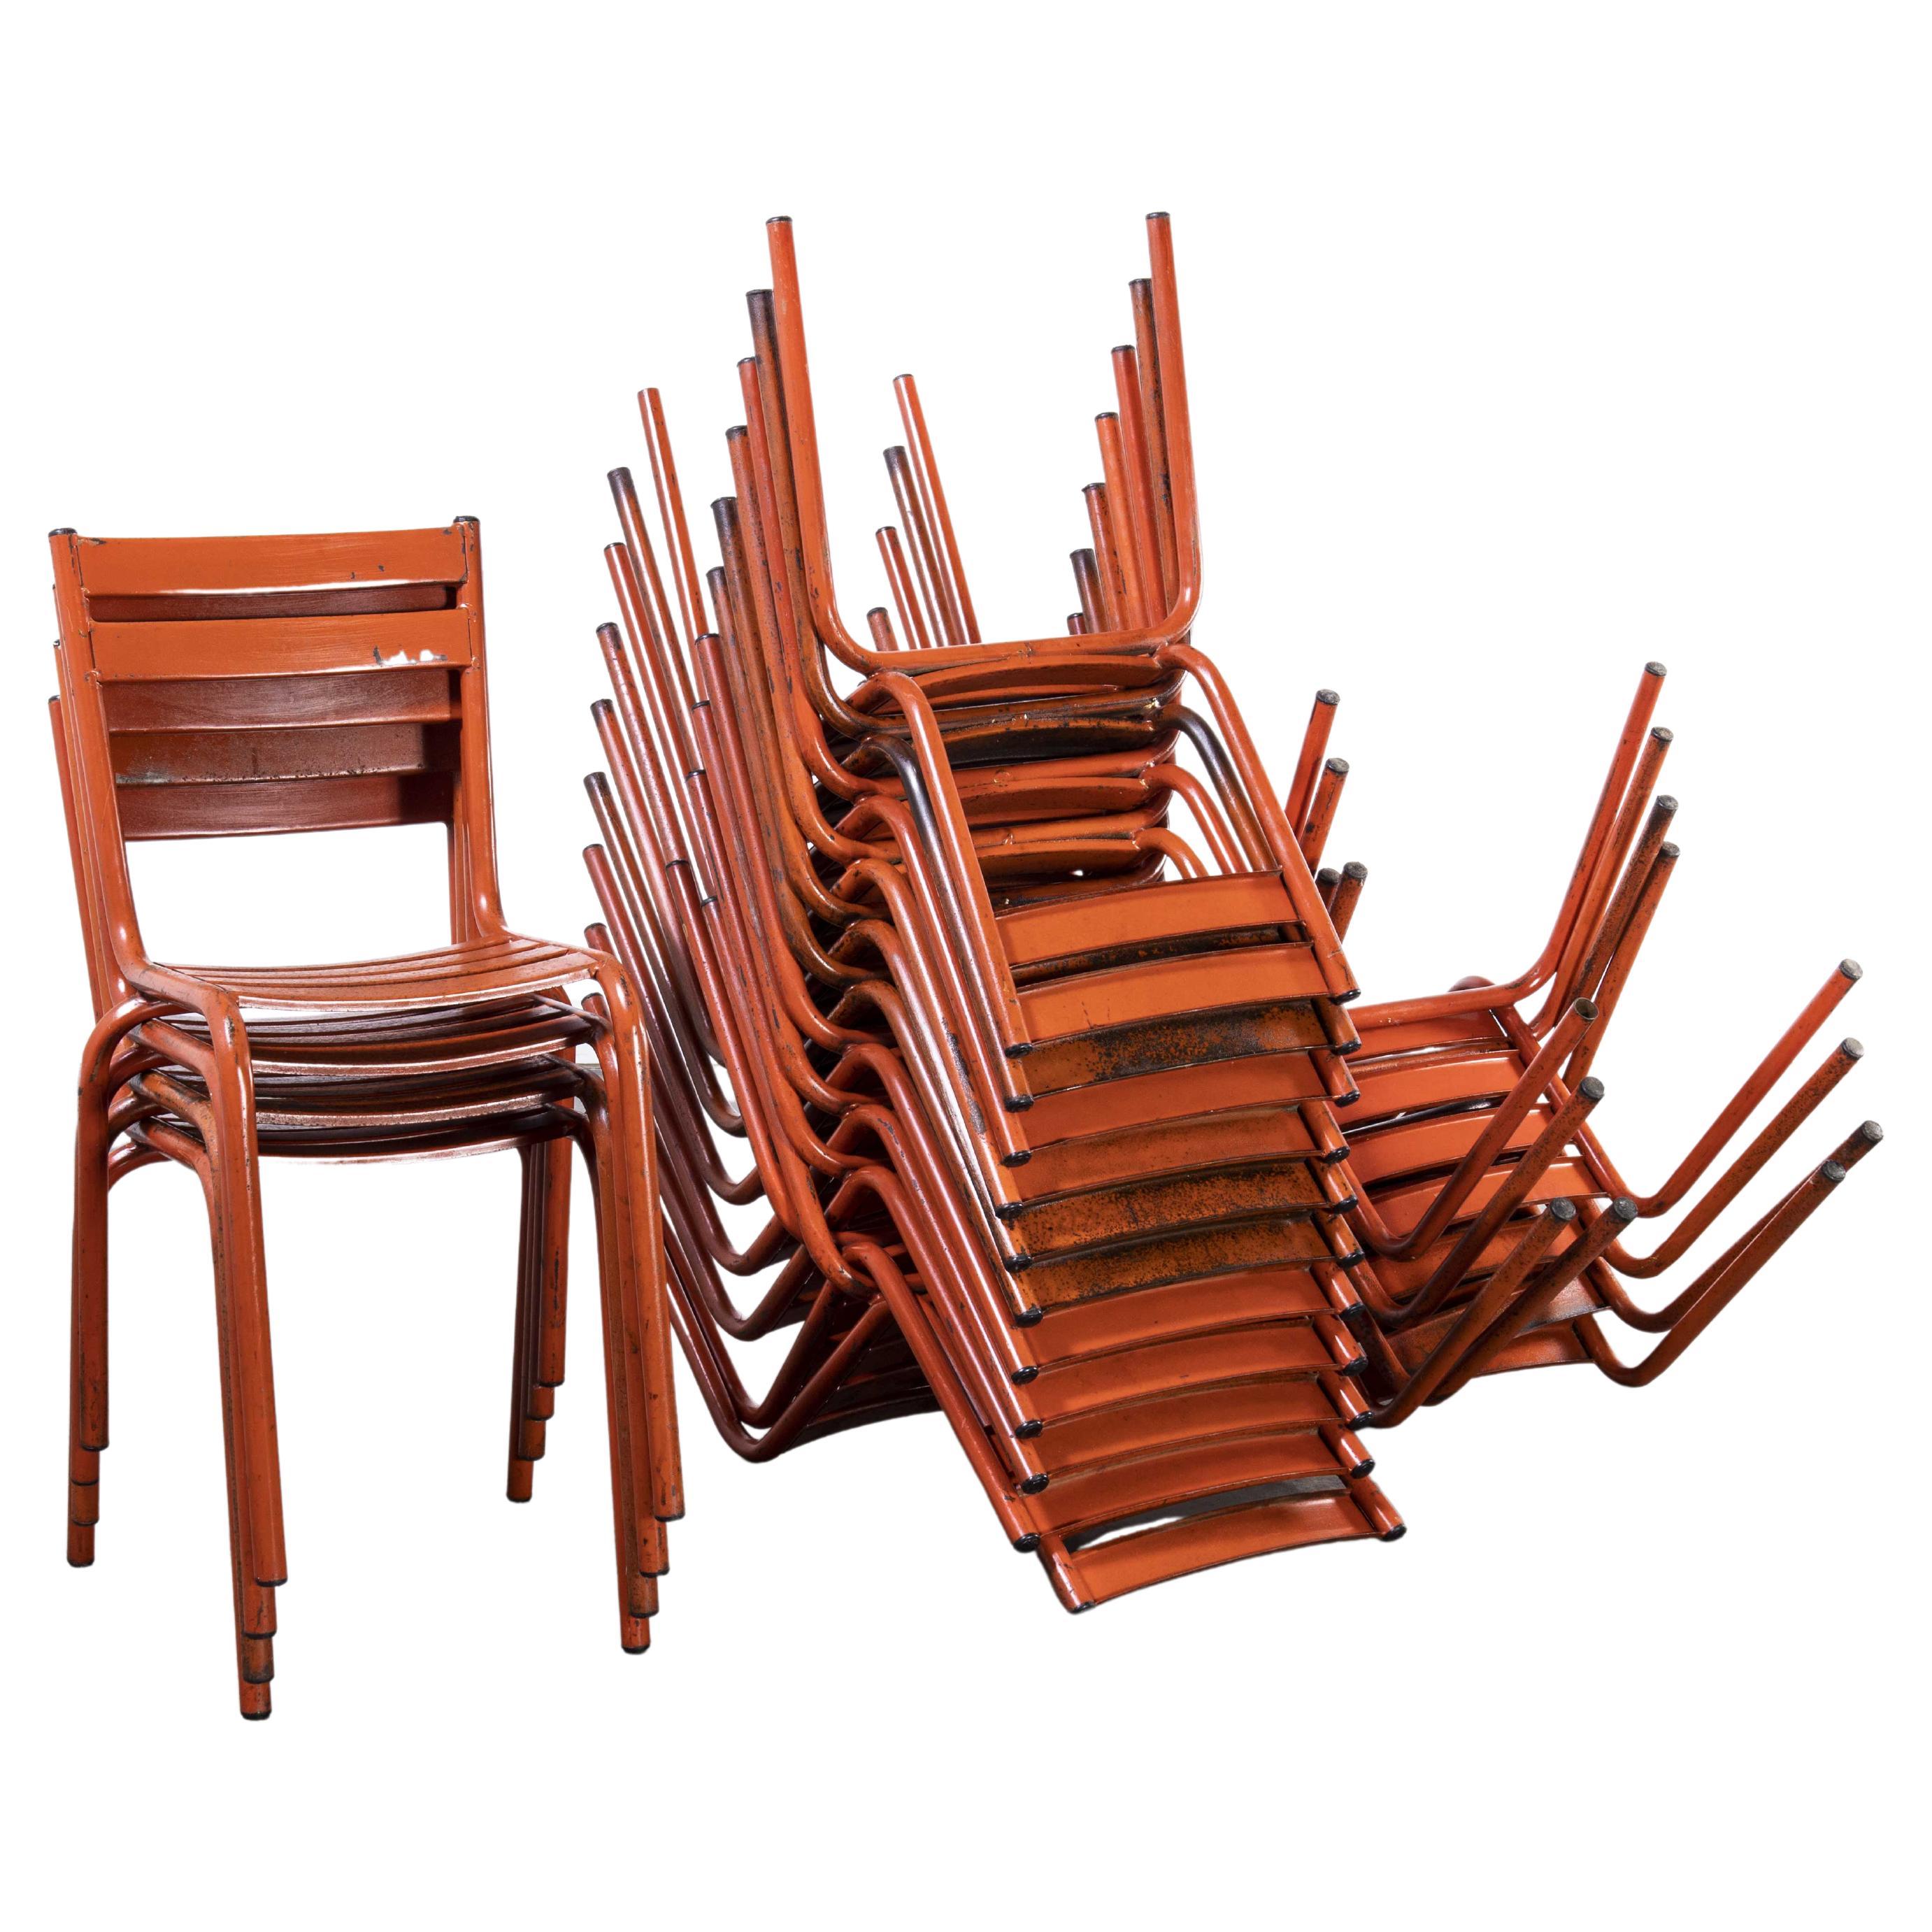 1950's French ArtProg Metal Stacking Outdoor Chairs - Various Quantities Availab im Angebot